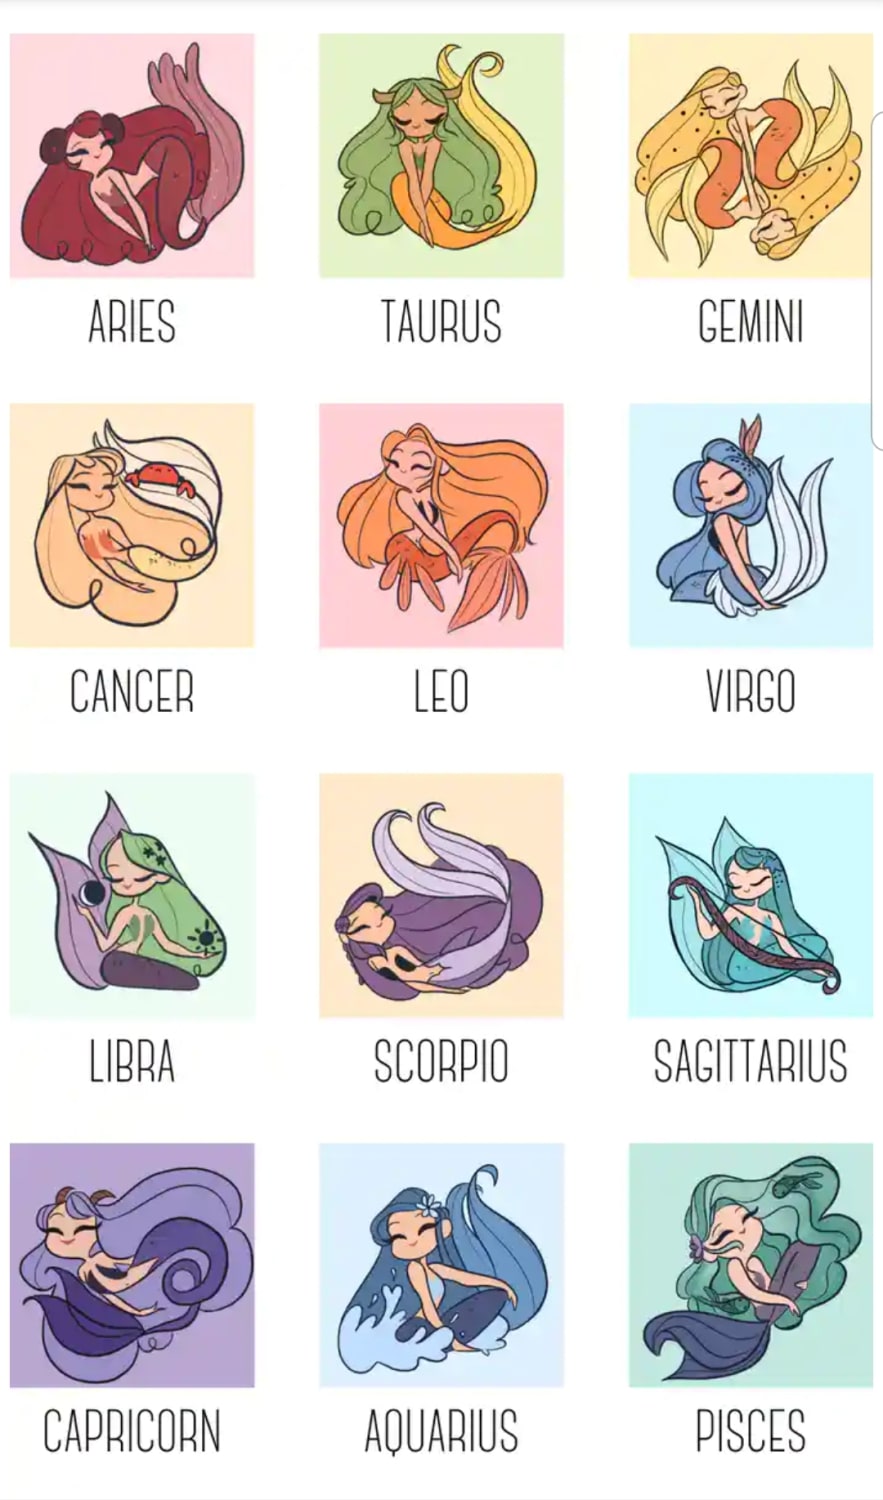 My wife drew all 12 Zodiac signs as mermaids and is making them into pins, stickers, and illustrations. Her father said she won't succeed as an artist but here she is!